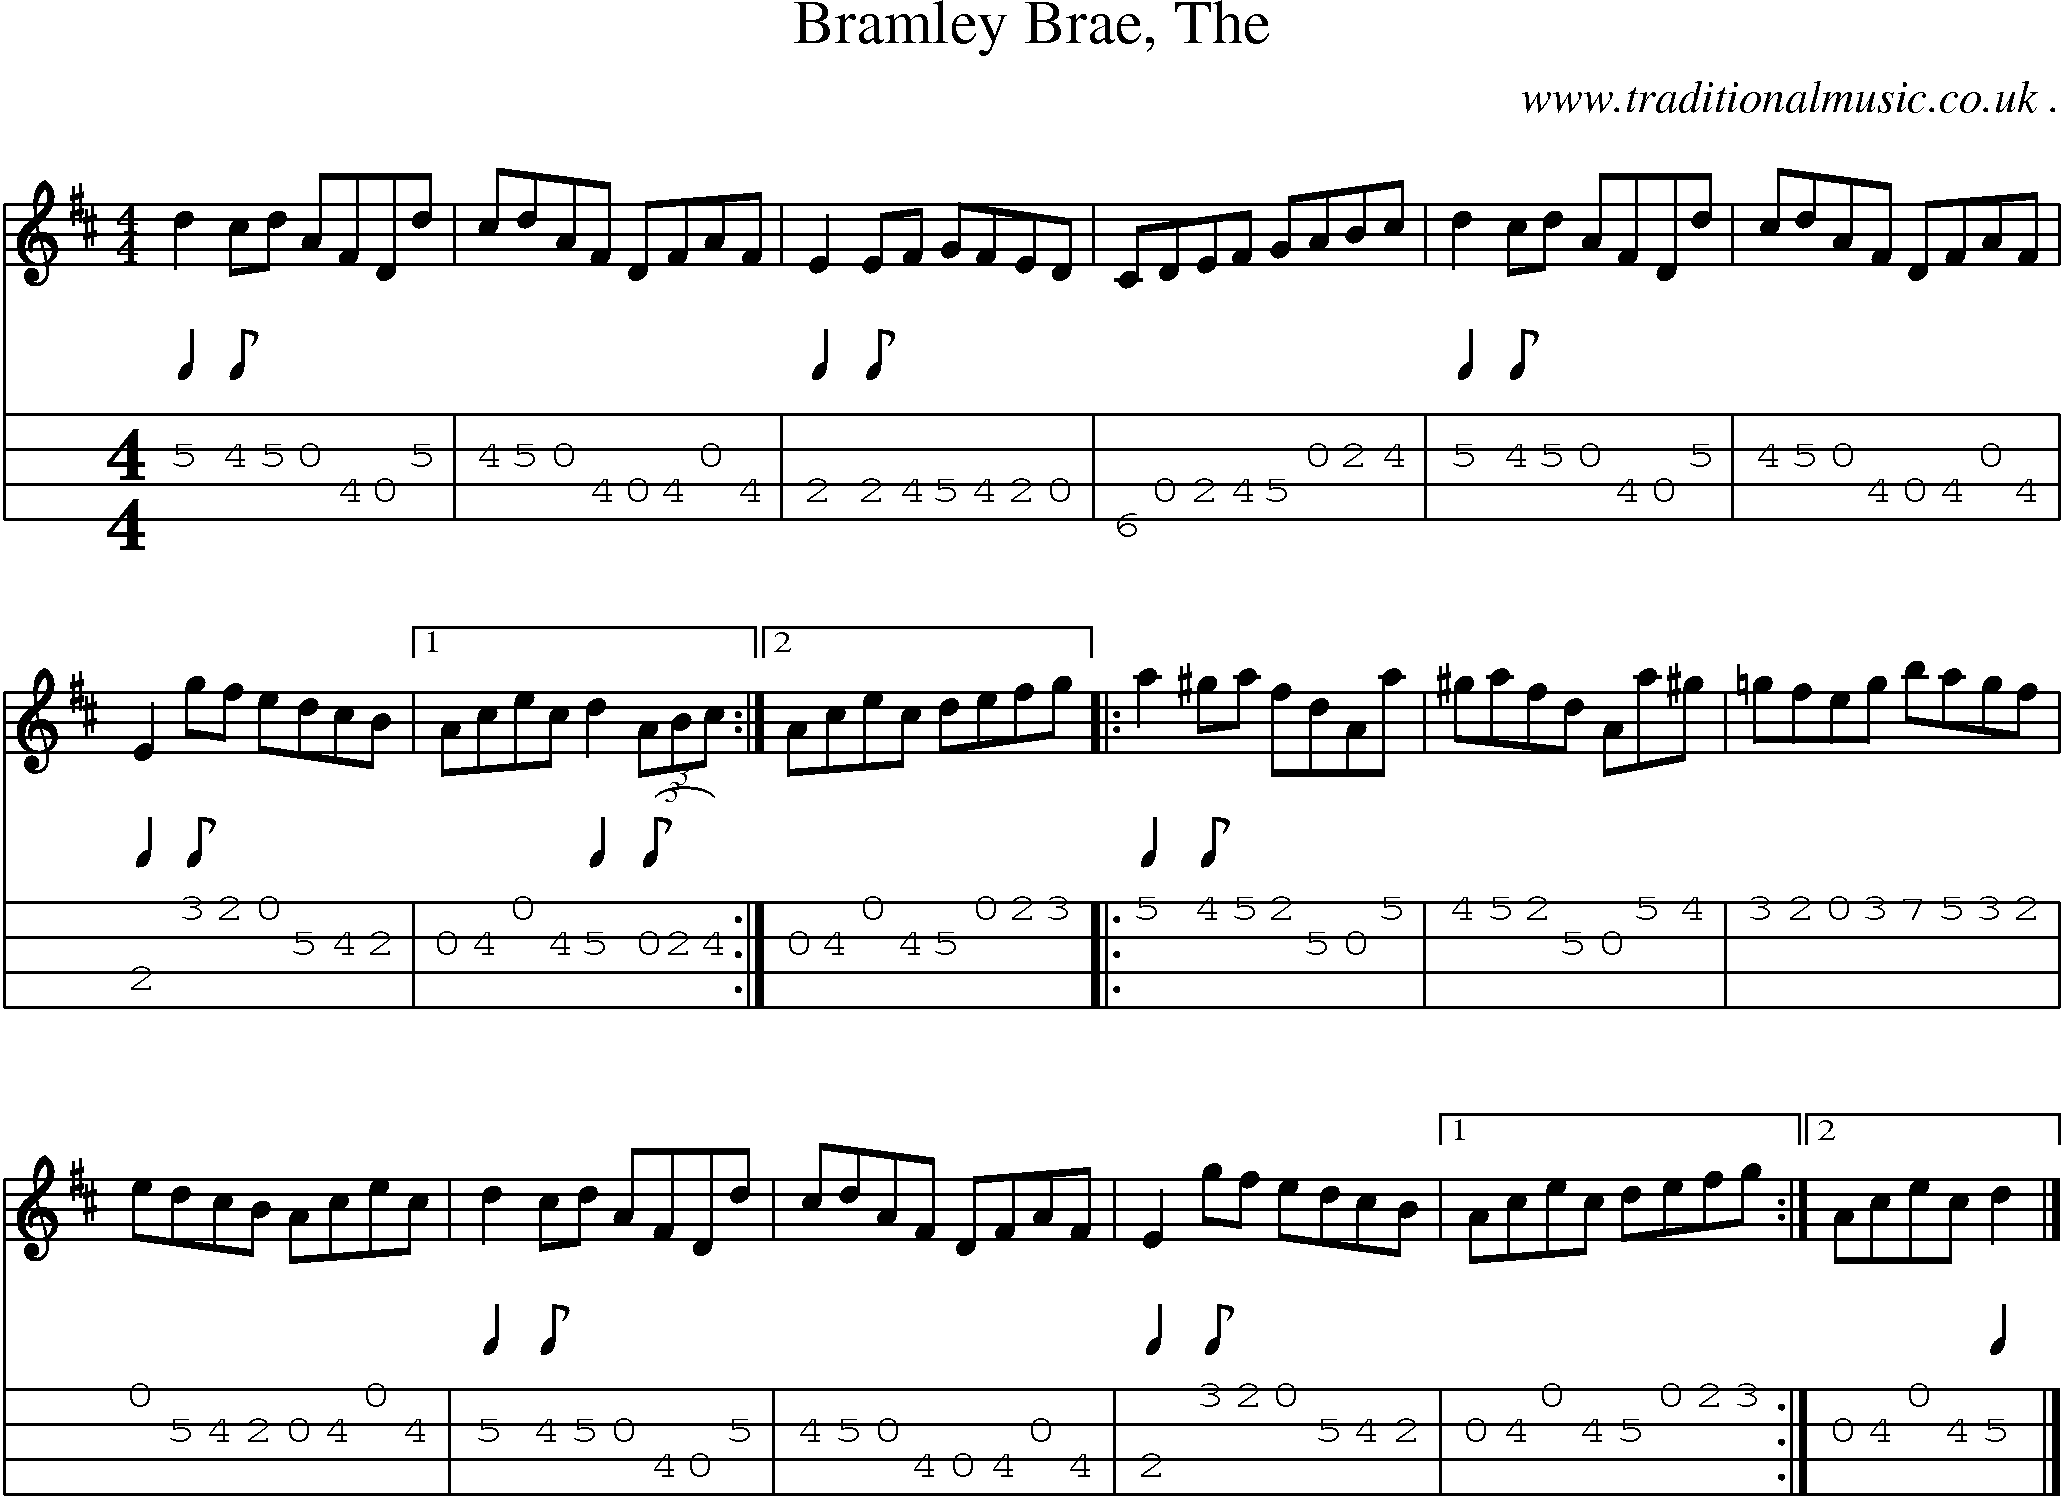 Sheet-music  score, Chords and Mandolin Tabs for Bramley Brae The